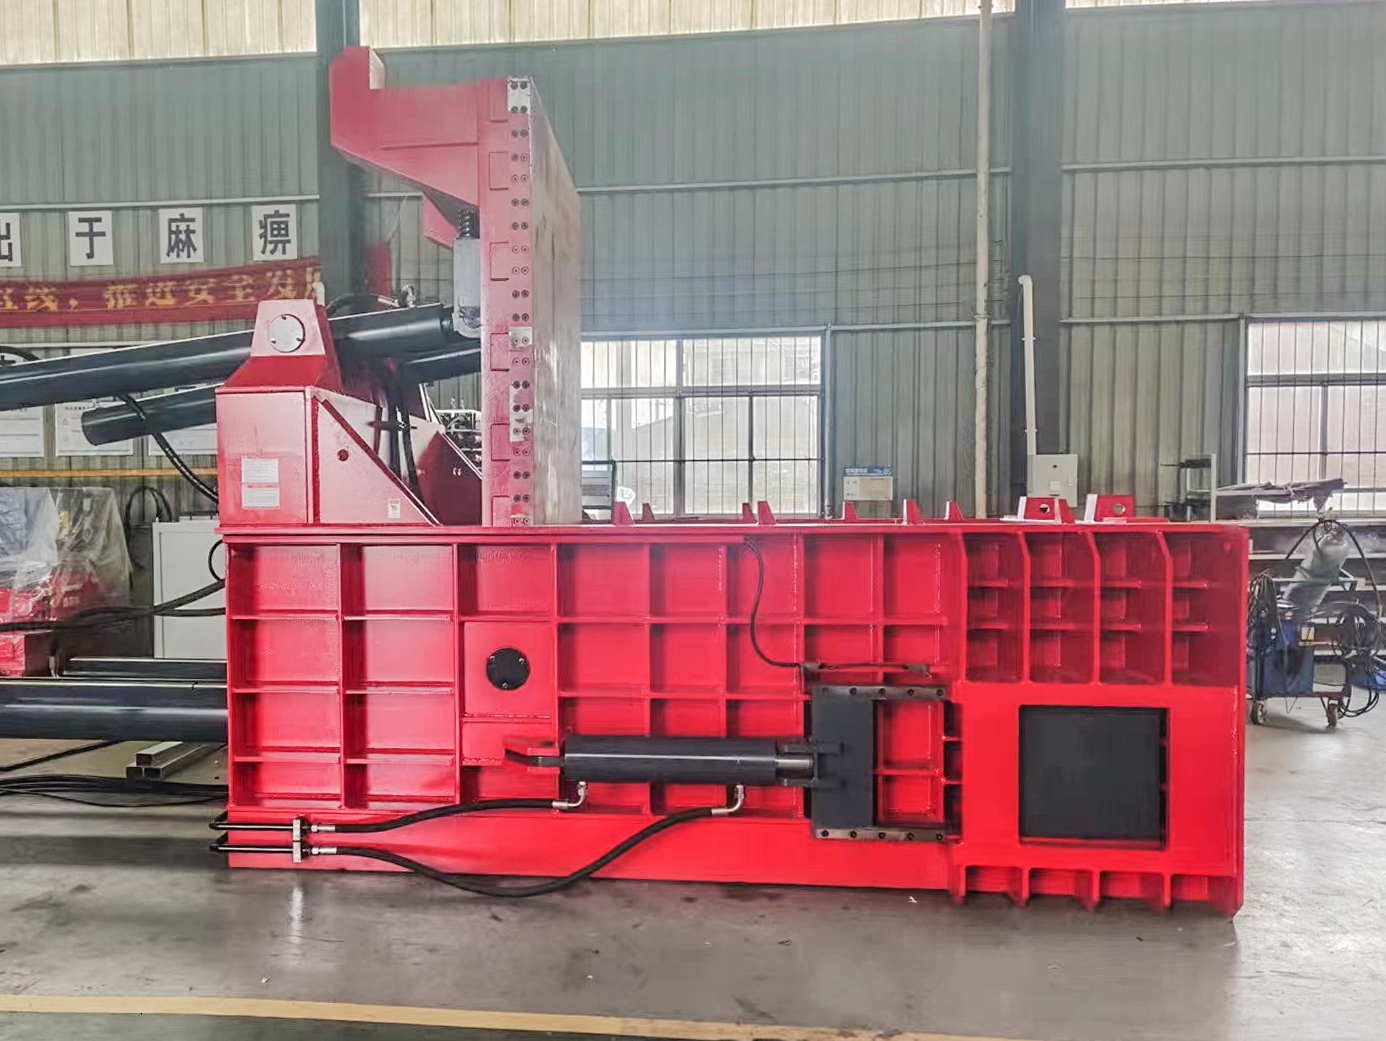 ENERPAT AMB-L2520-250 Lid Style Metal Baler On The Way To New Zealand